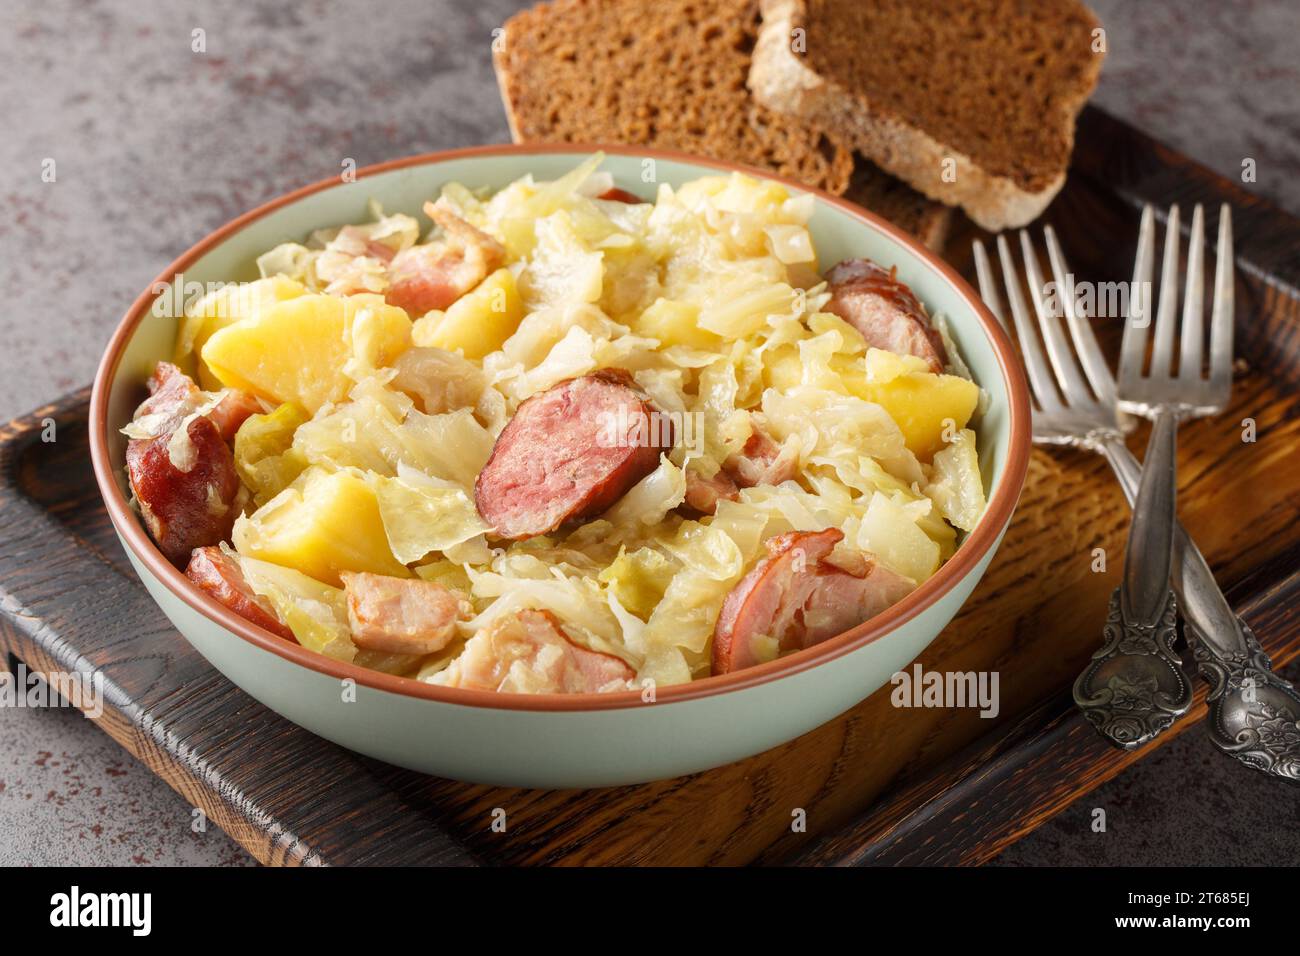 Hunter's cabbage stewed with sausage, potatoes, bacon and onions close-up in a bowl on the table. Horizontal Stock Photo